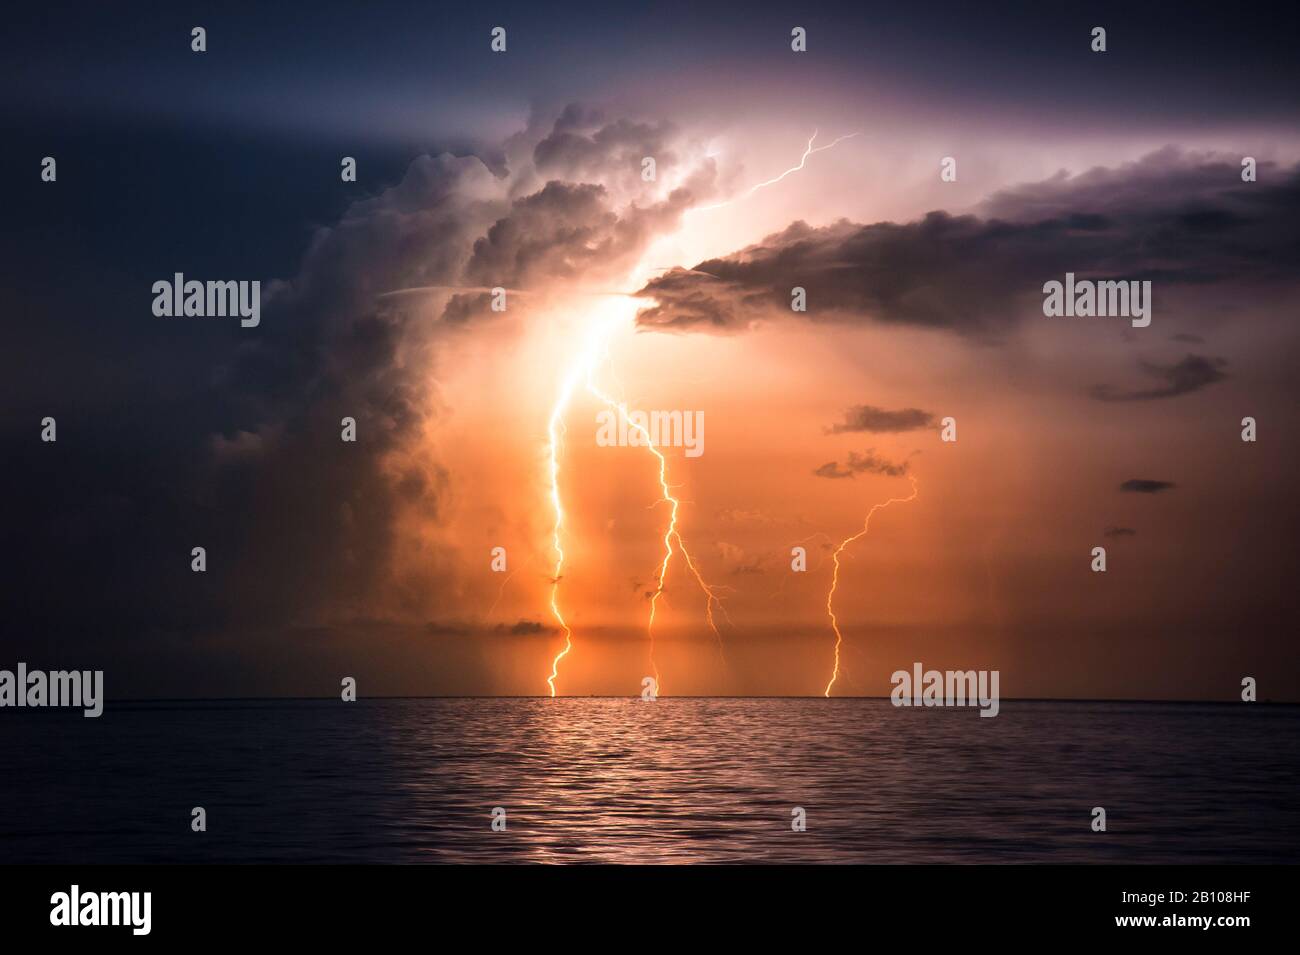 Violent discharges of lightning from an inclined wind tower over Lake Maracaibo (Catatumbo thunderstorm, the place with the highest lightning density on earth) Ologa, Zulia, Venezuela, South America Stock Photo